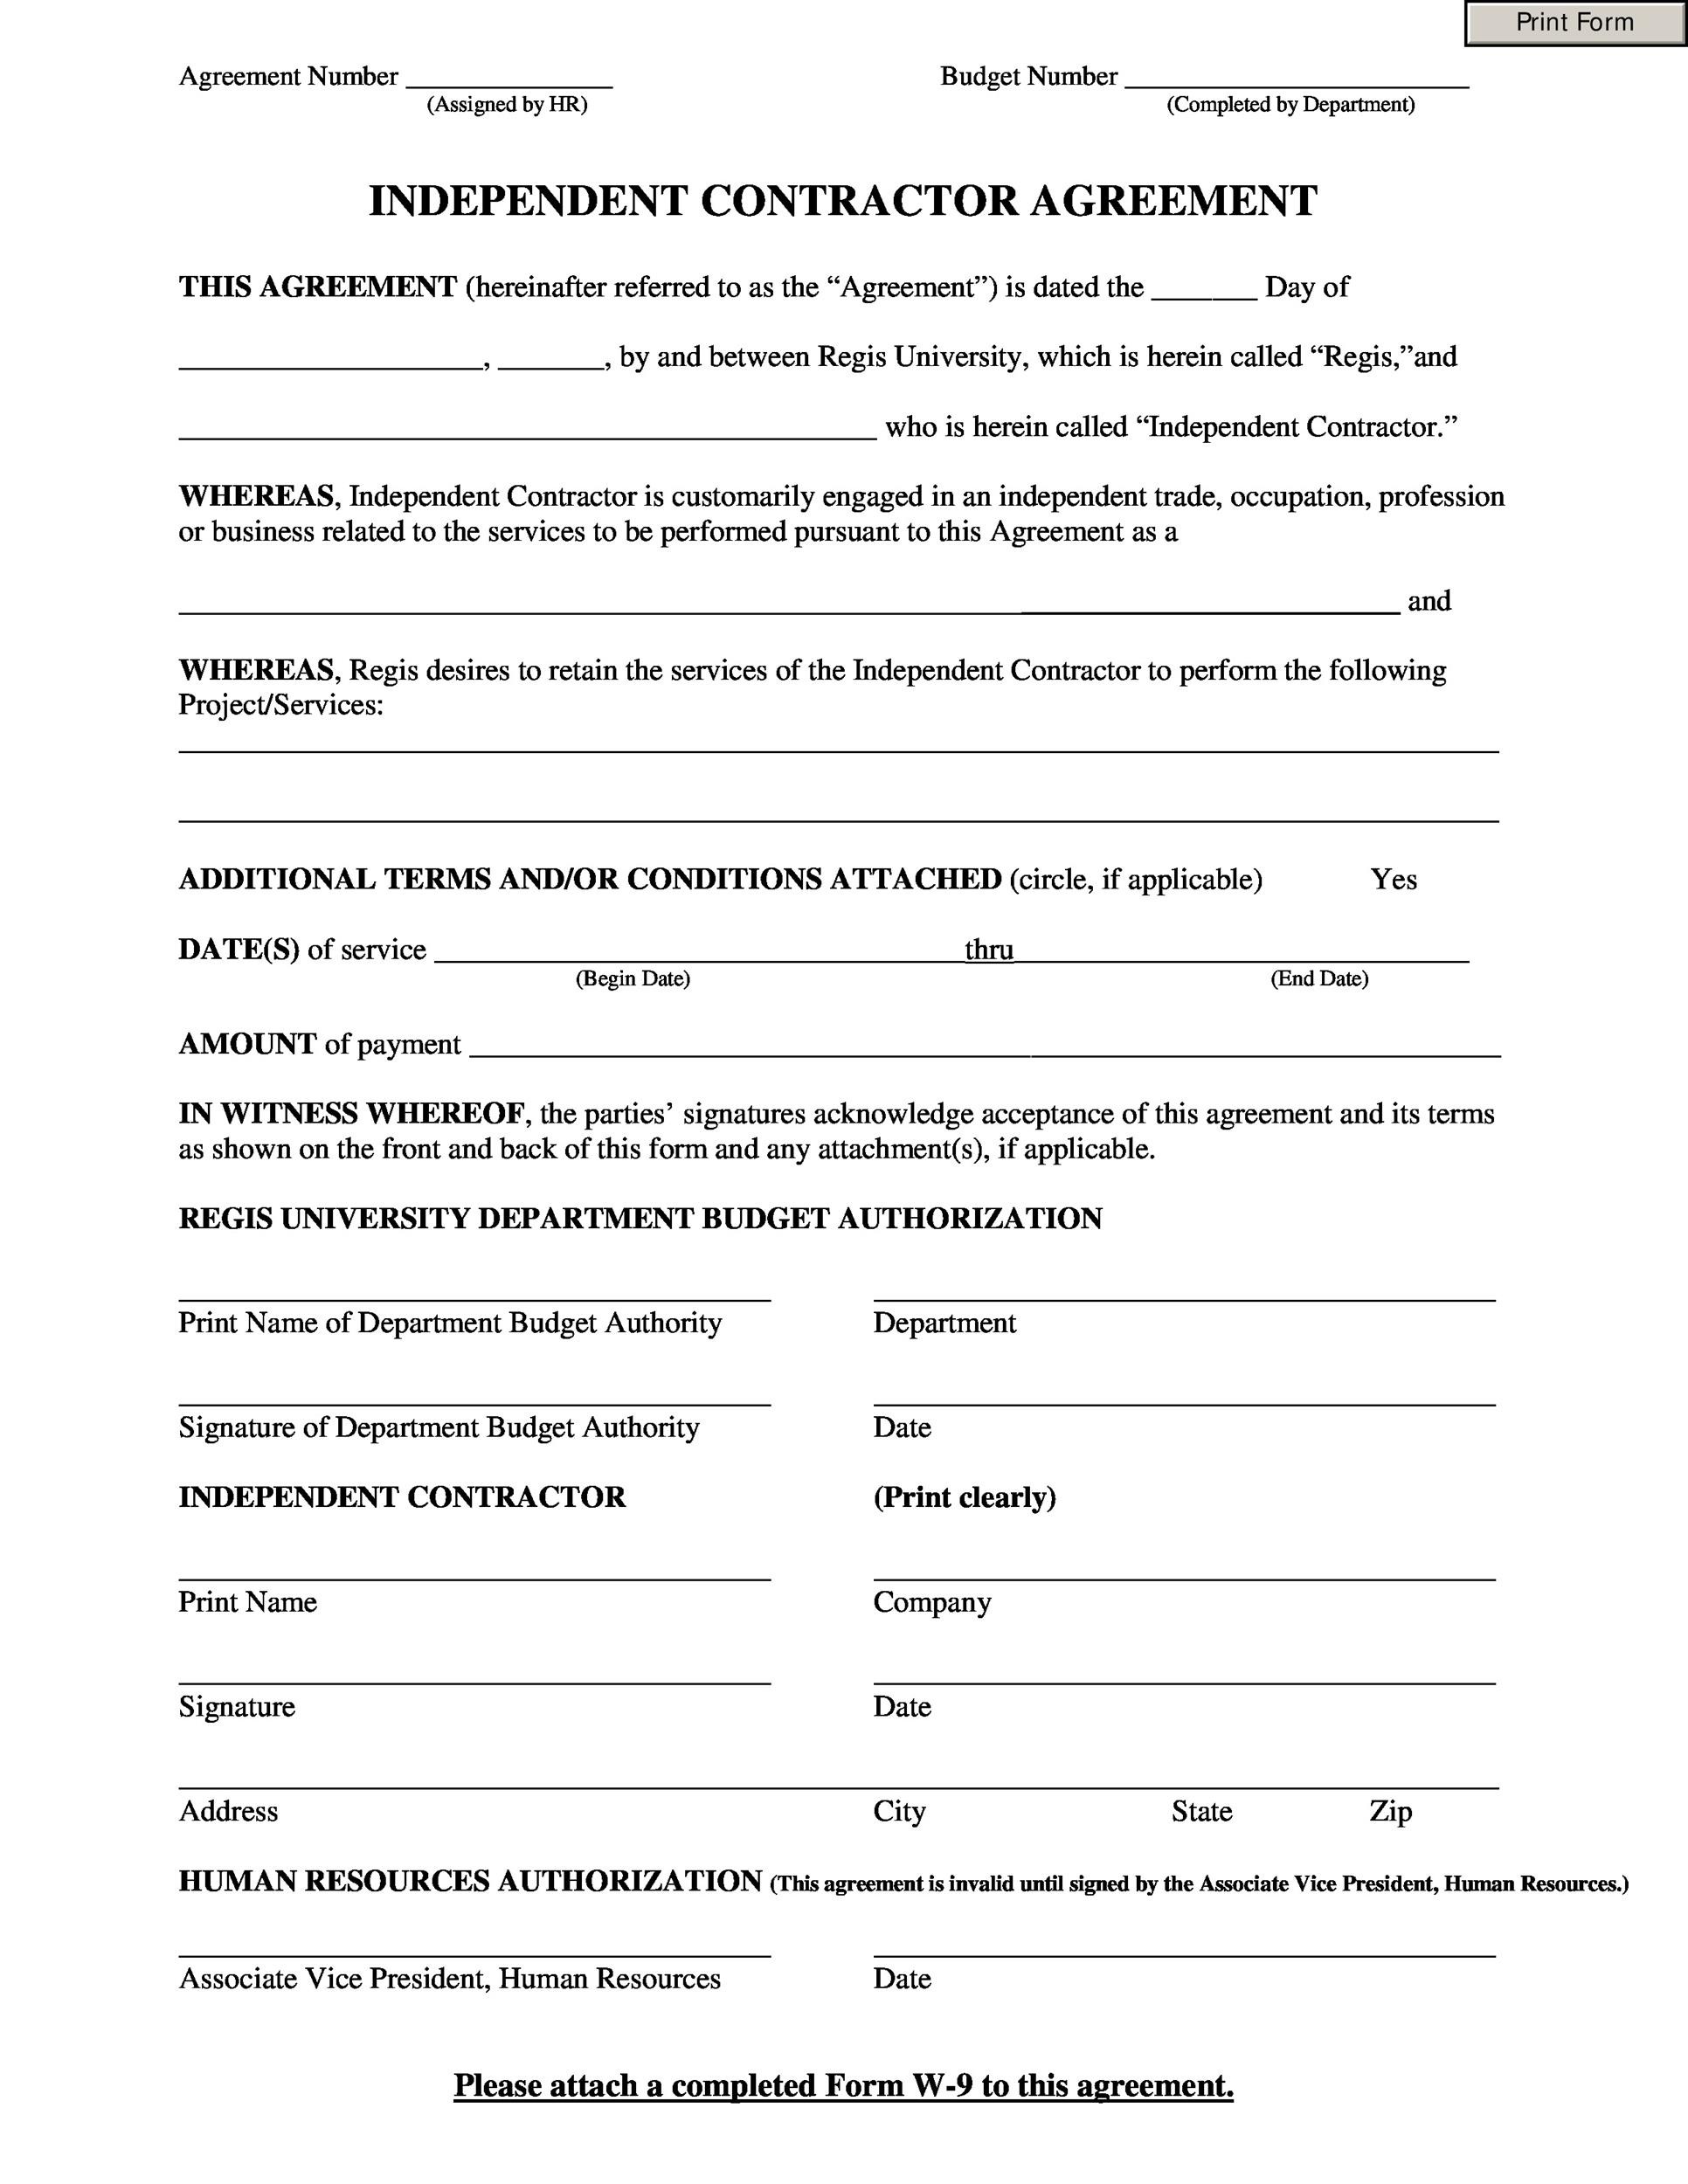 50 FREE Independent Contractor Agreement Forms Templates